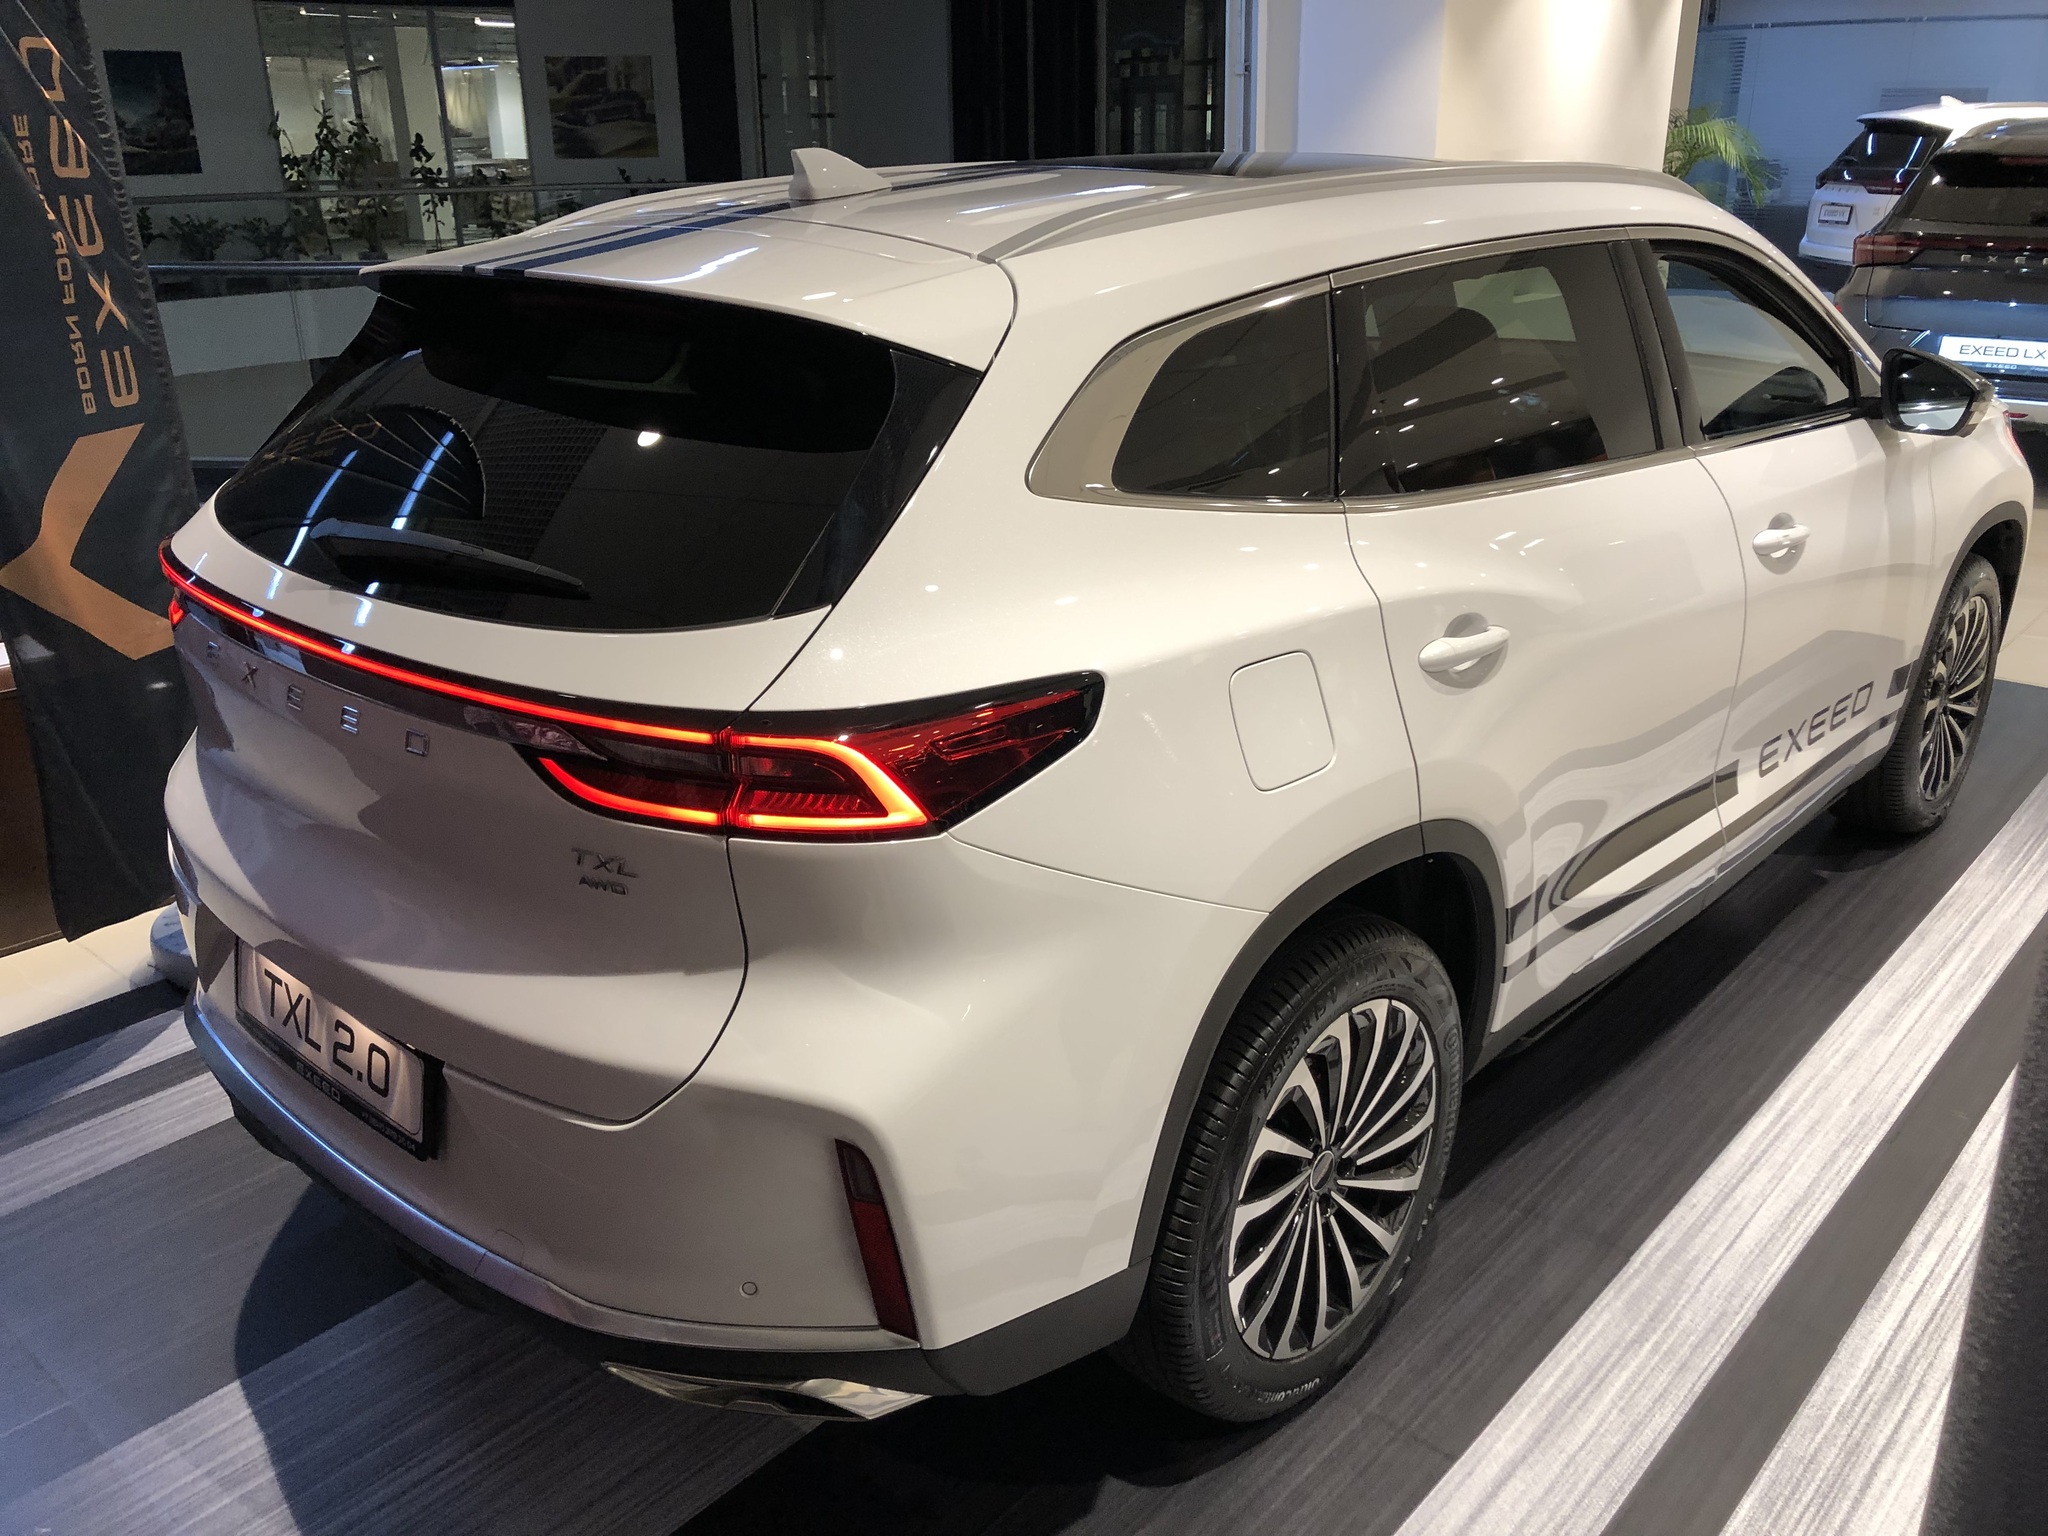 Exceed 2.0 sport edition